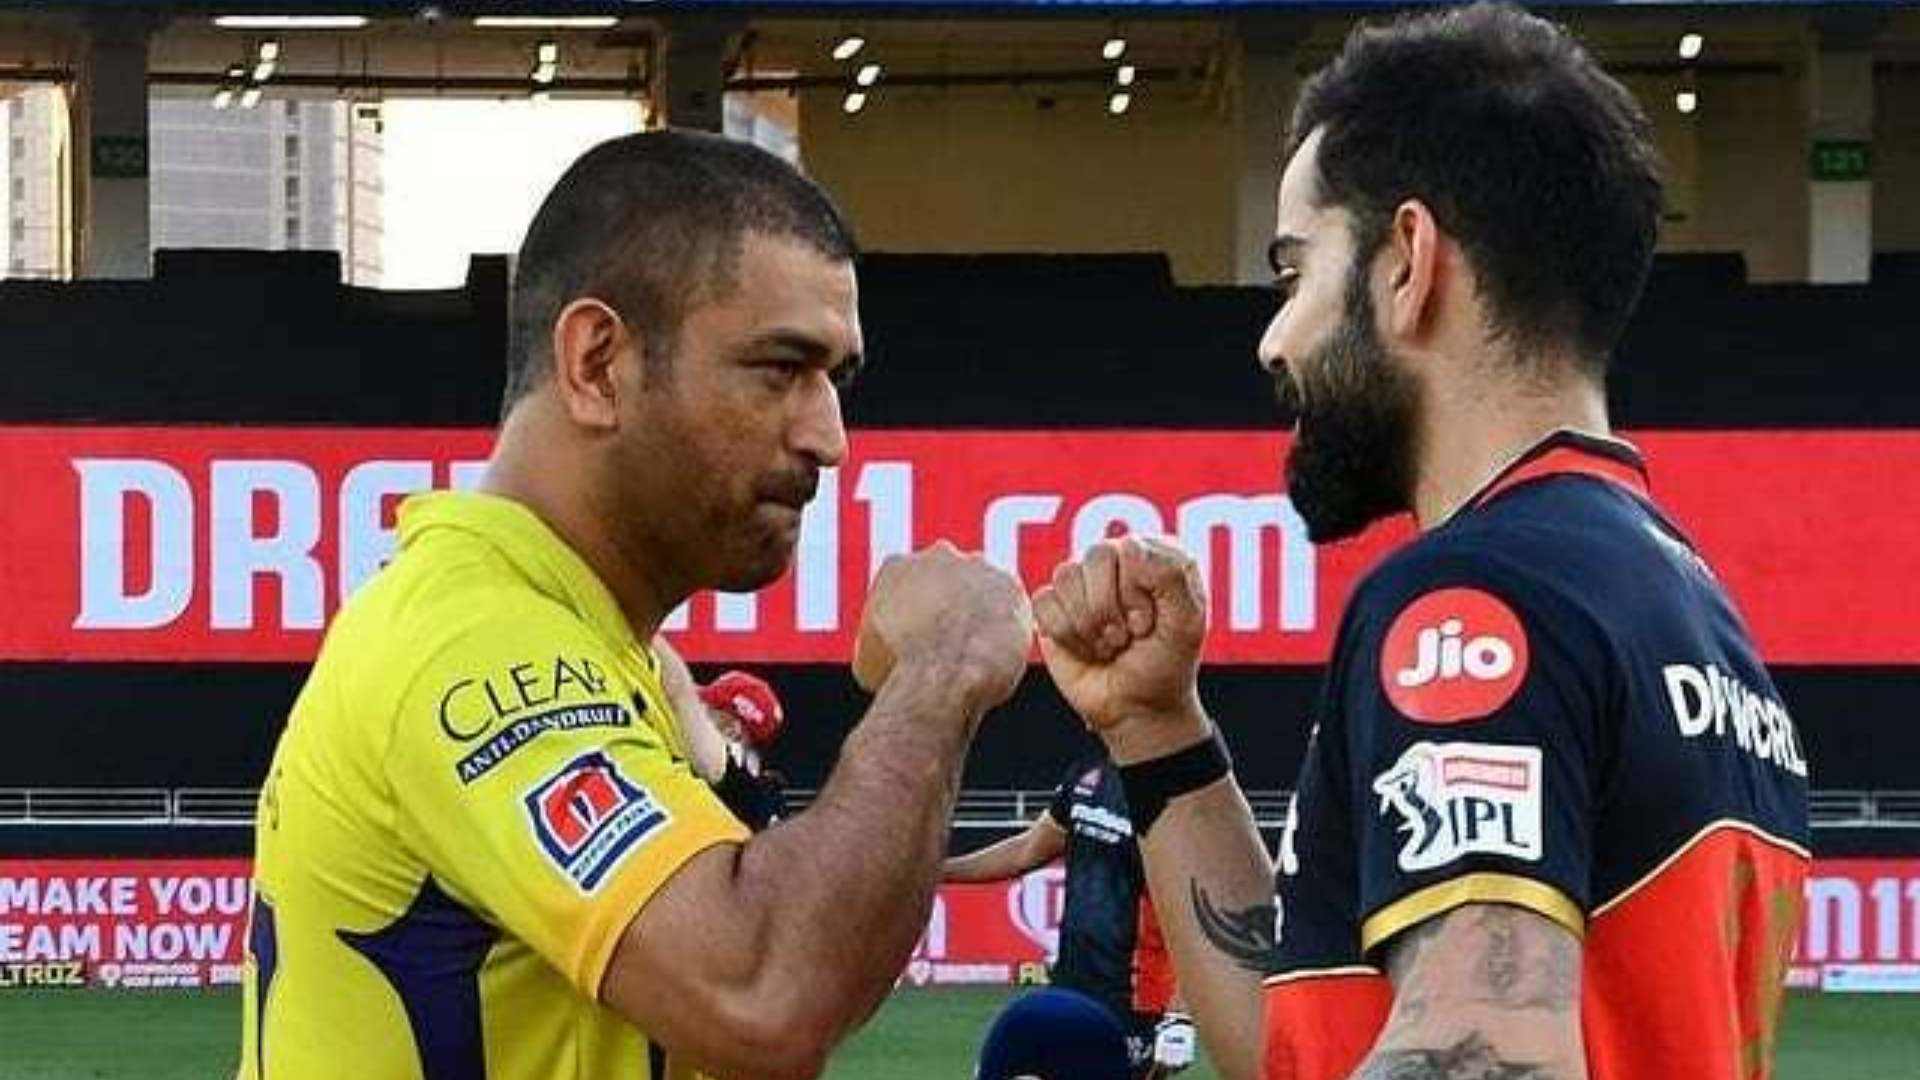 MS Dhoni and Virat Kohli's leadership makes the Chennai Super Kings and Royal Challengers Bangalore gives the rivalry an edge.